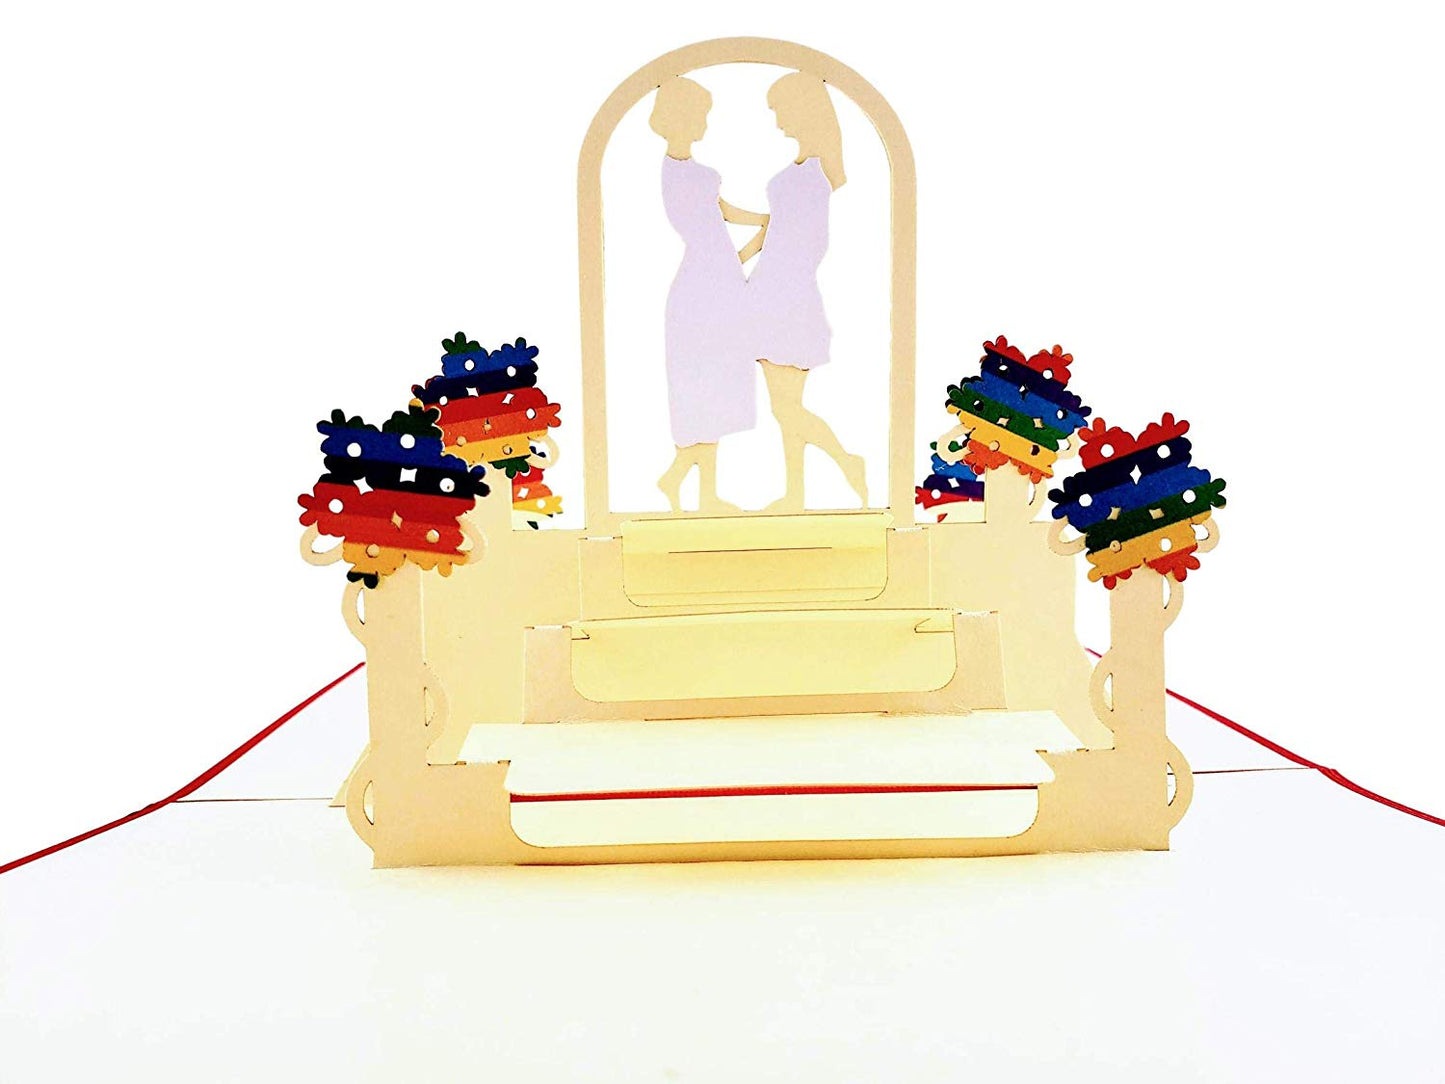 Lesbian Couple Celebration 3D Pop Up Greeting Card - Engagement - LGBT - LGBTQ - Love - Special Days - iGifts And Cards